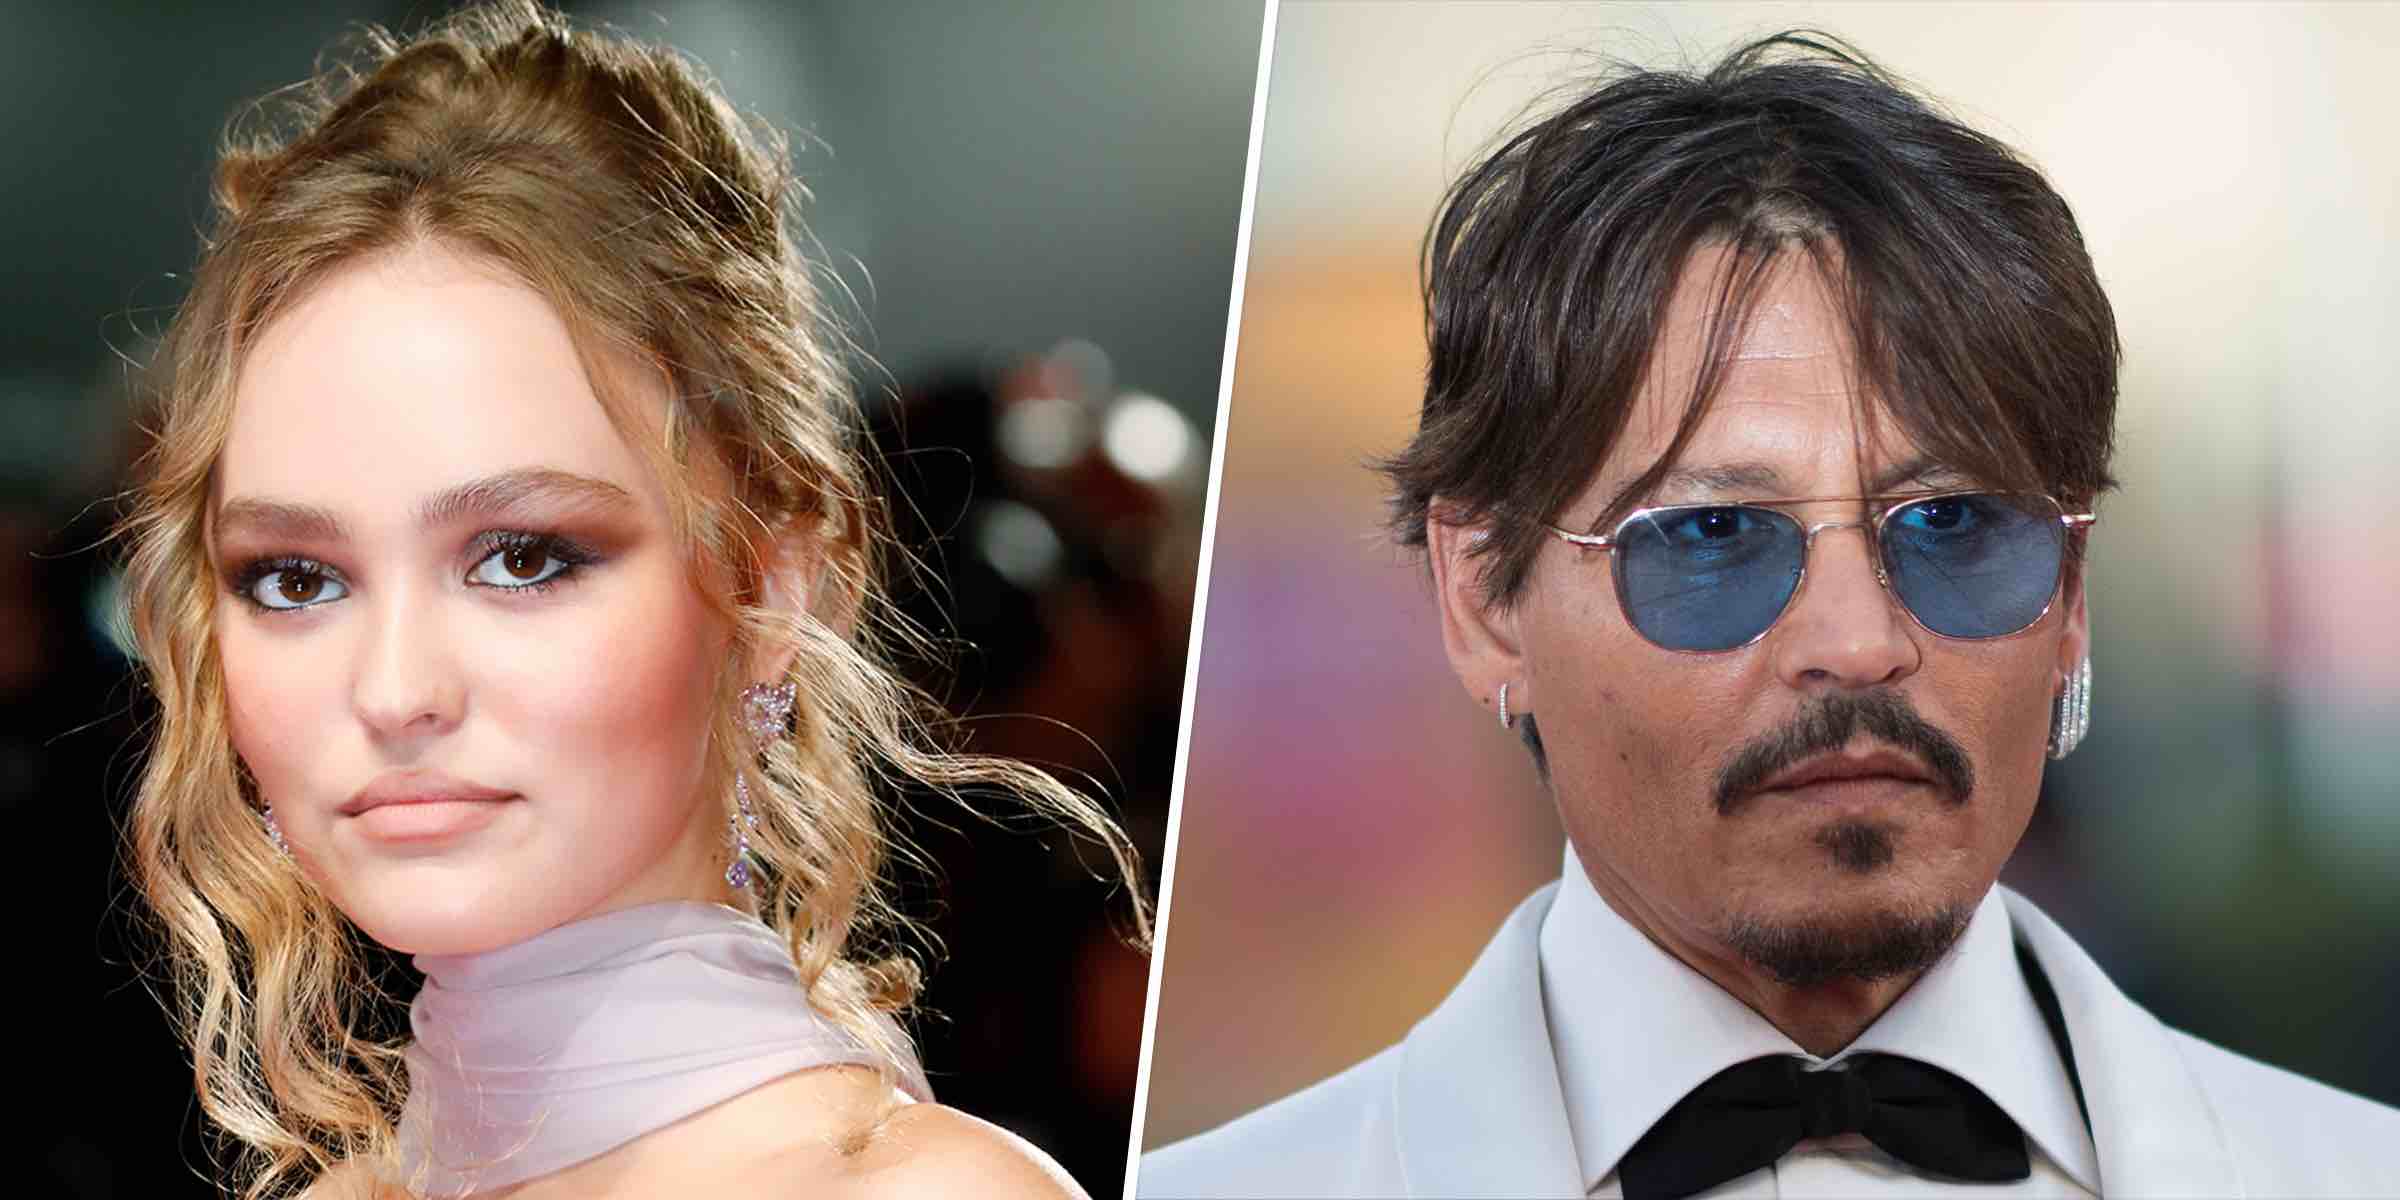 Johnny Depp Talks About His Daughter Lily Rose Depps Relationship With Rapper 070 Shake